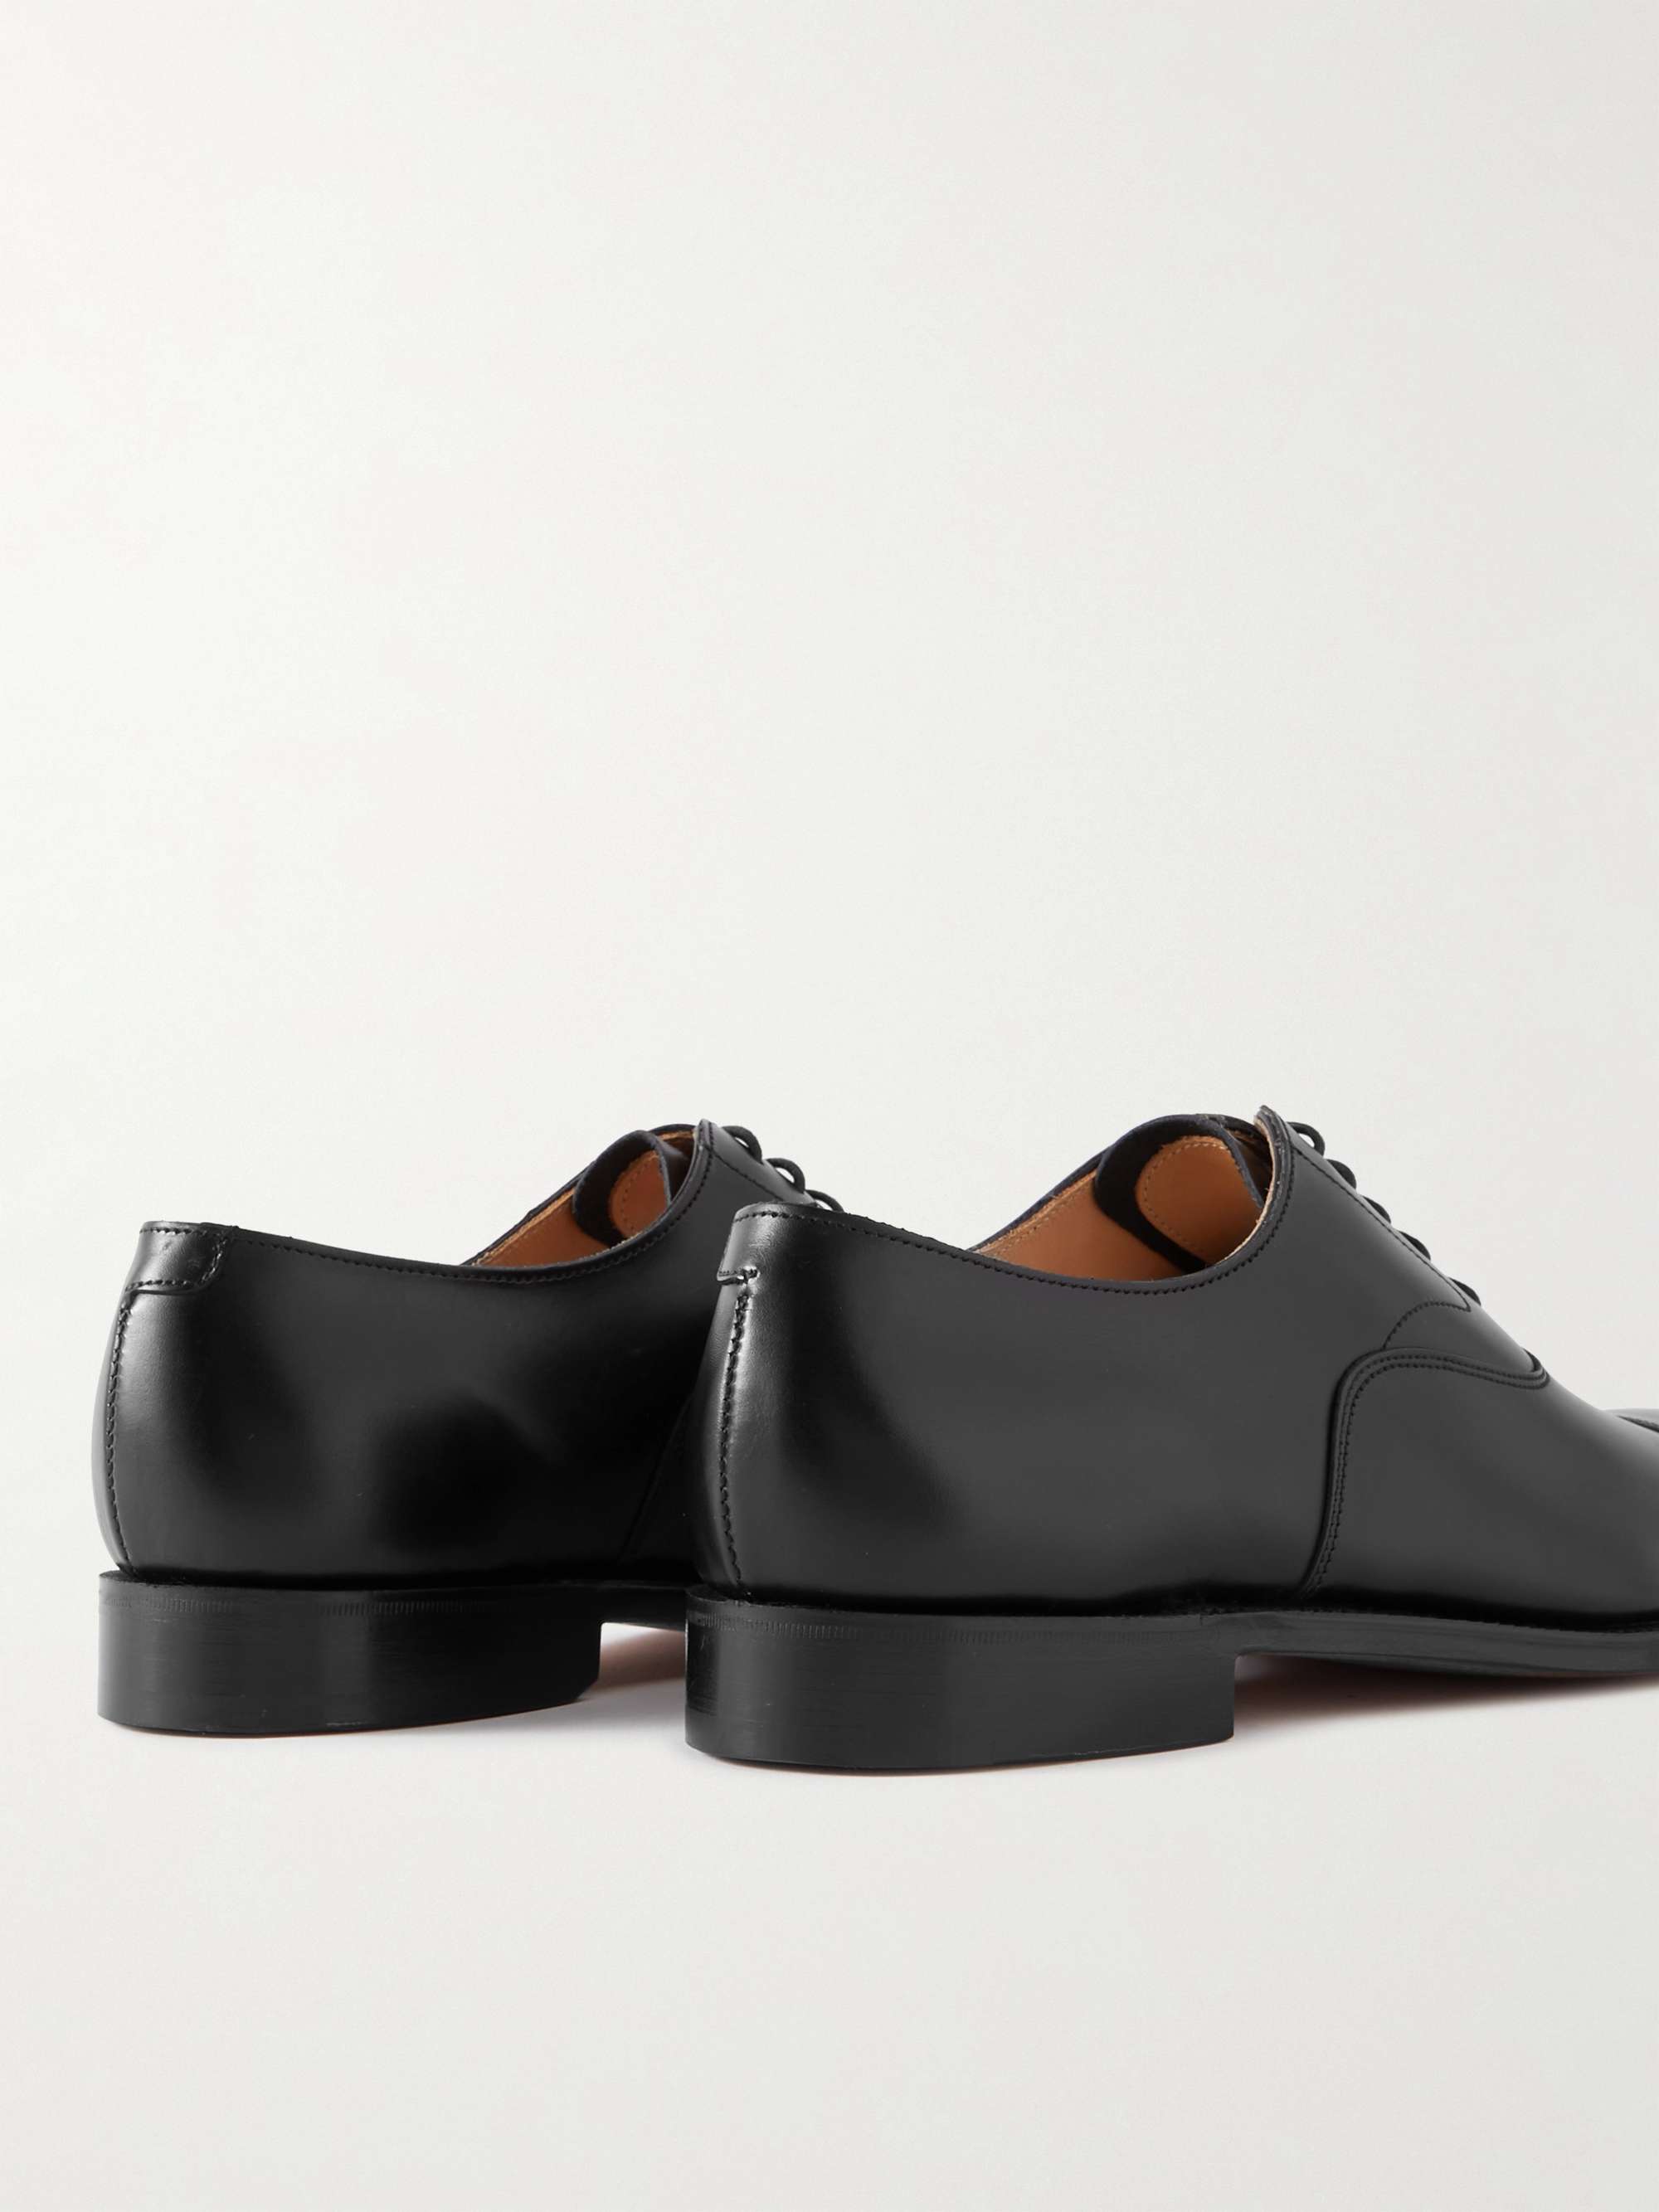 GRENSON Cambridge Leather Oxford Shoes